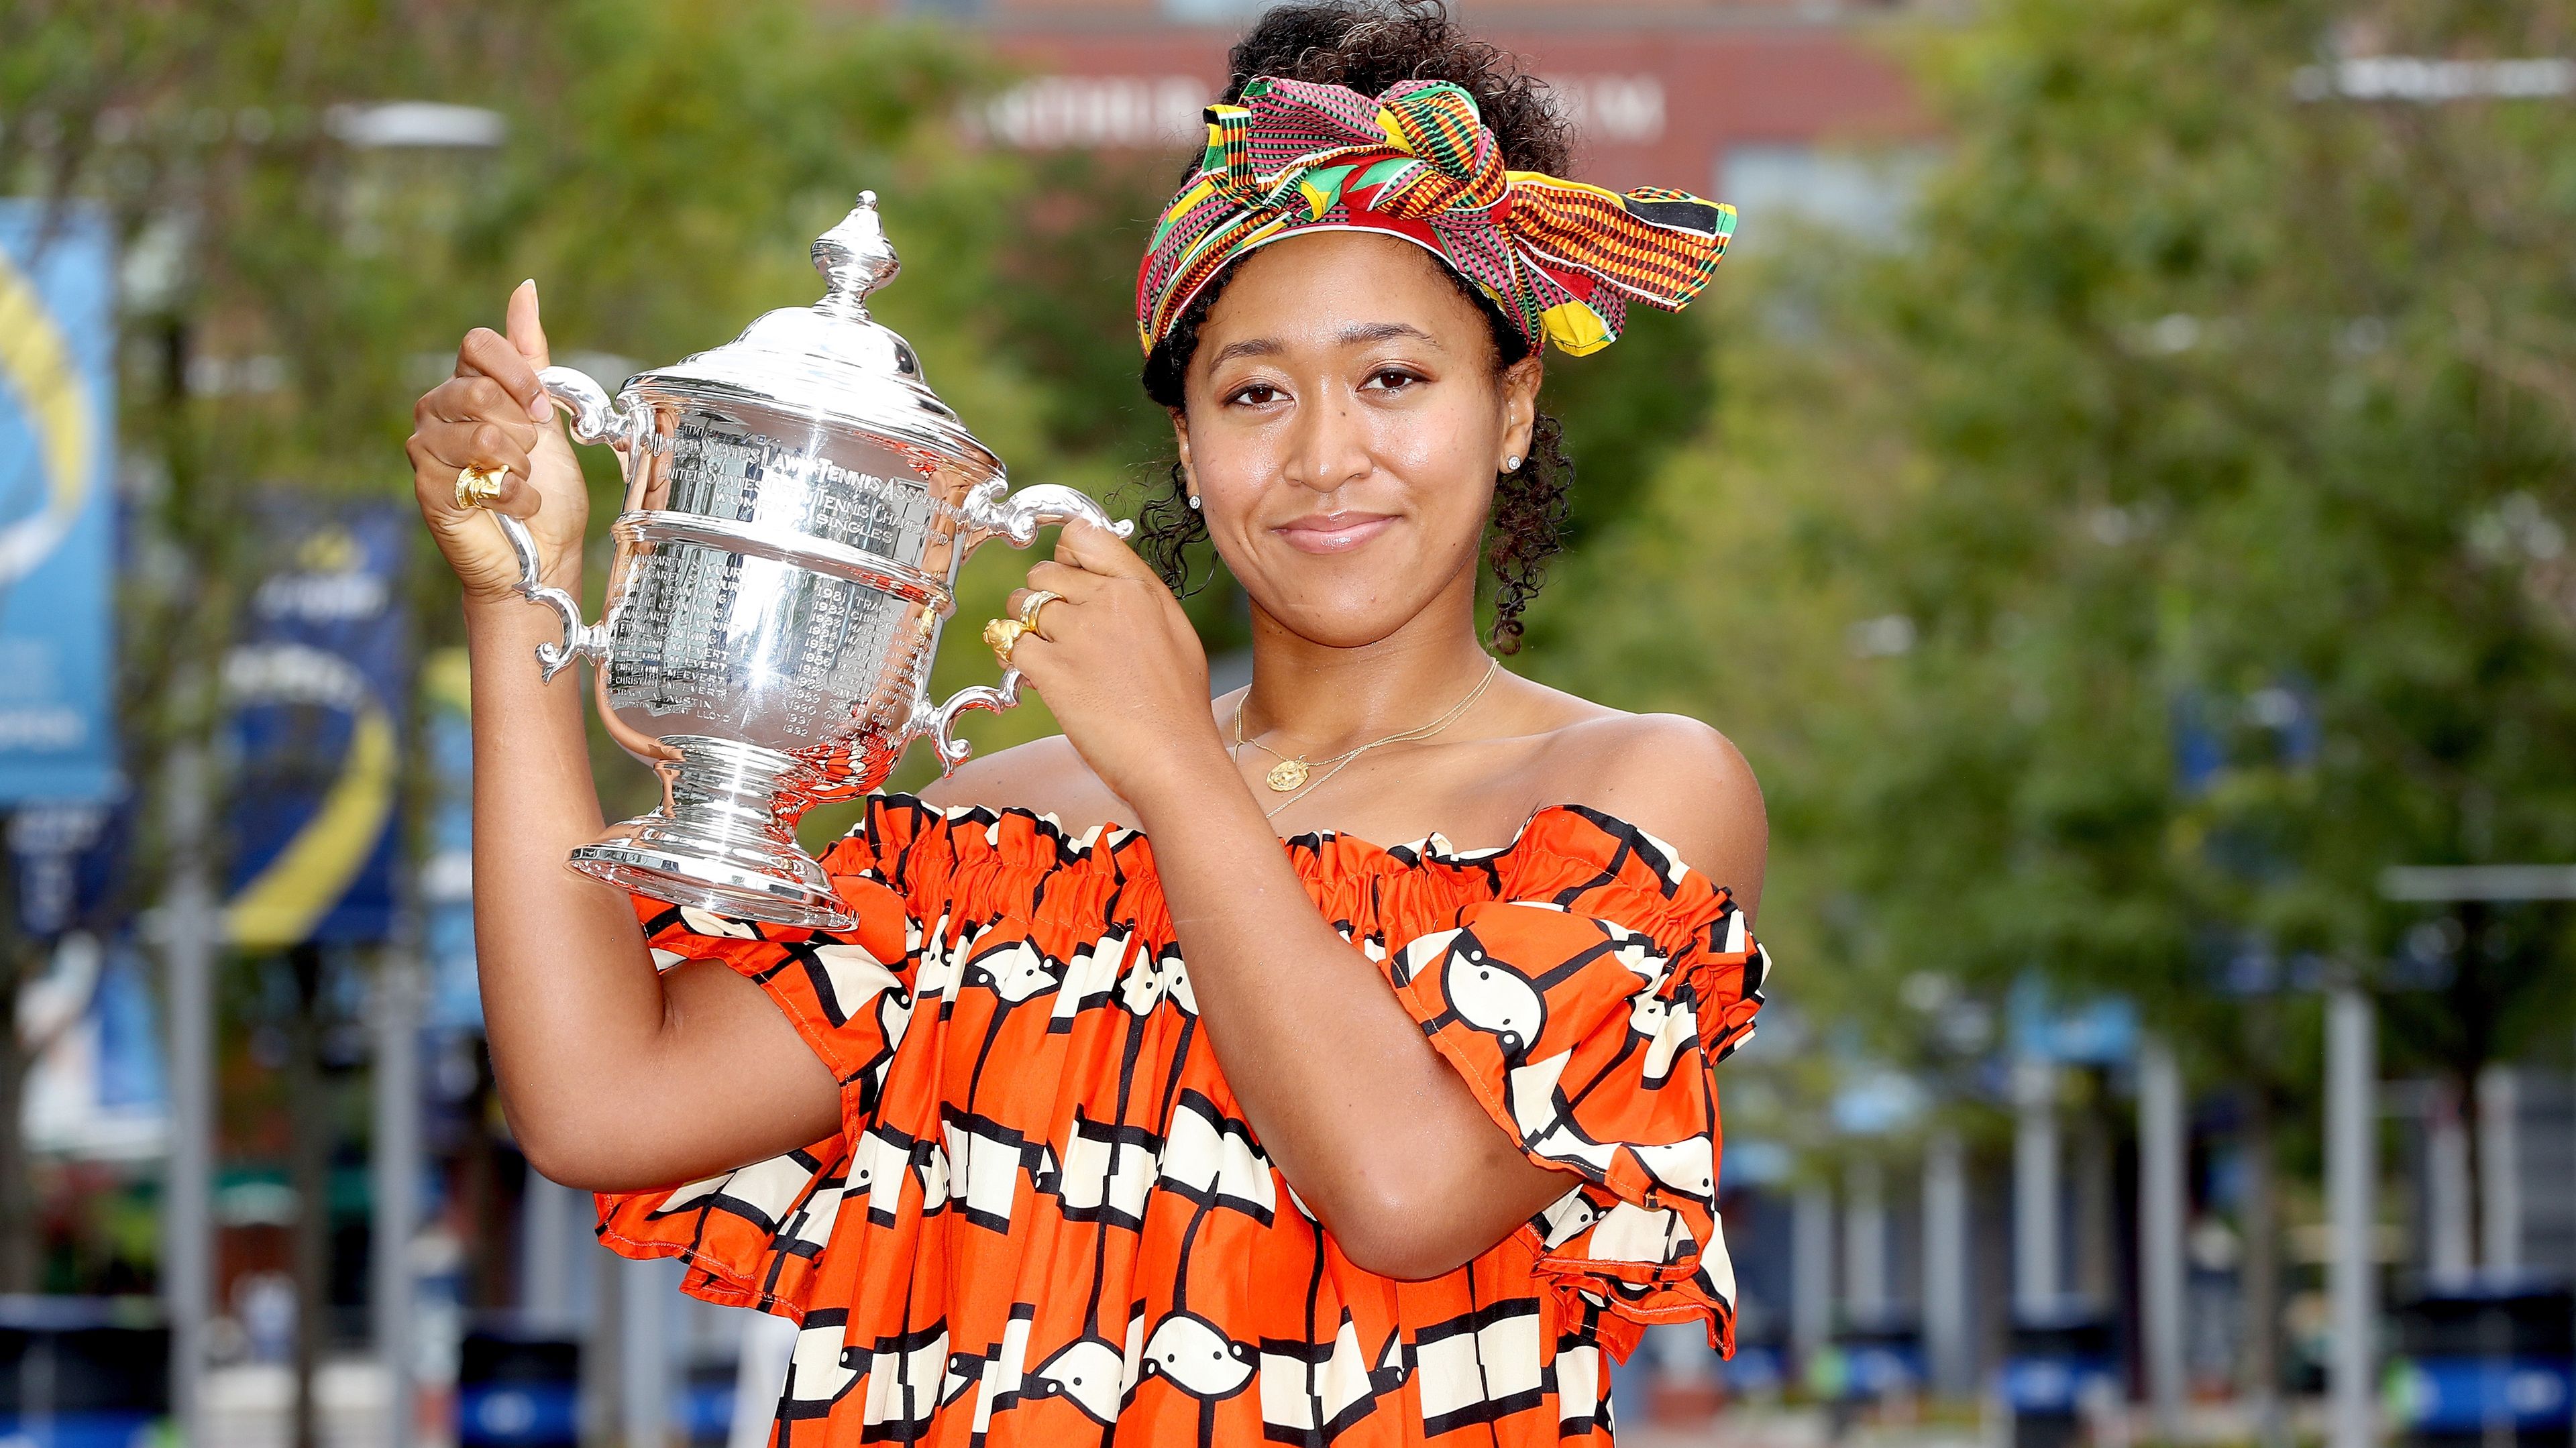 Naomi Osaka poses for photos with the US Open trophy.